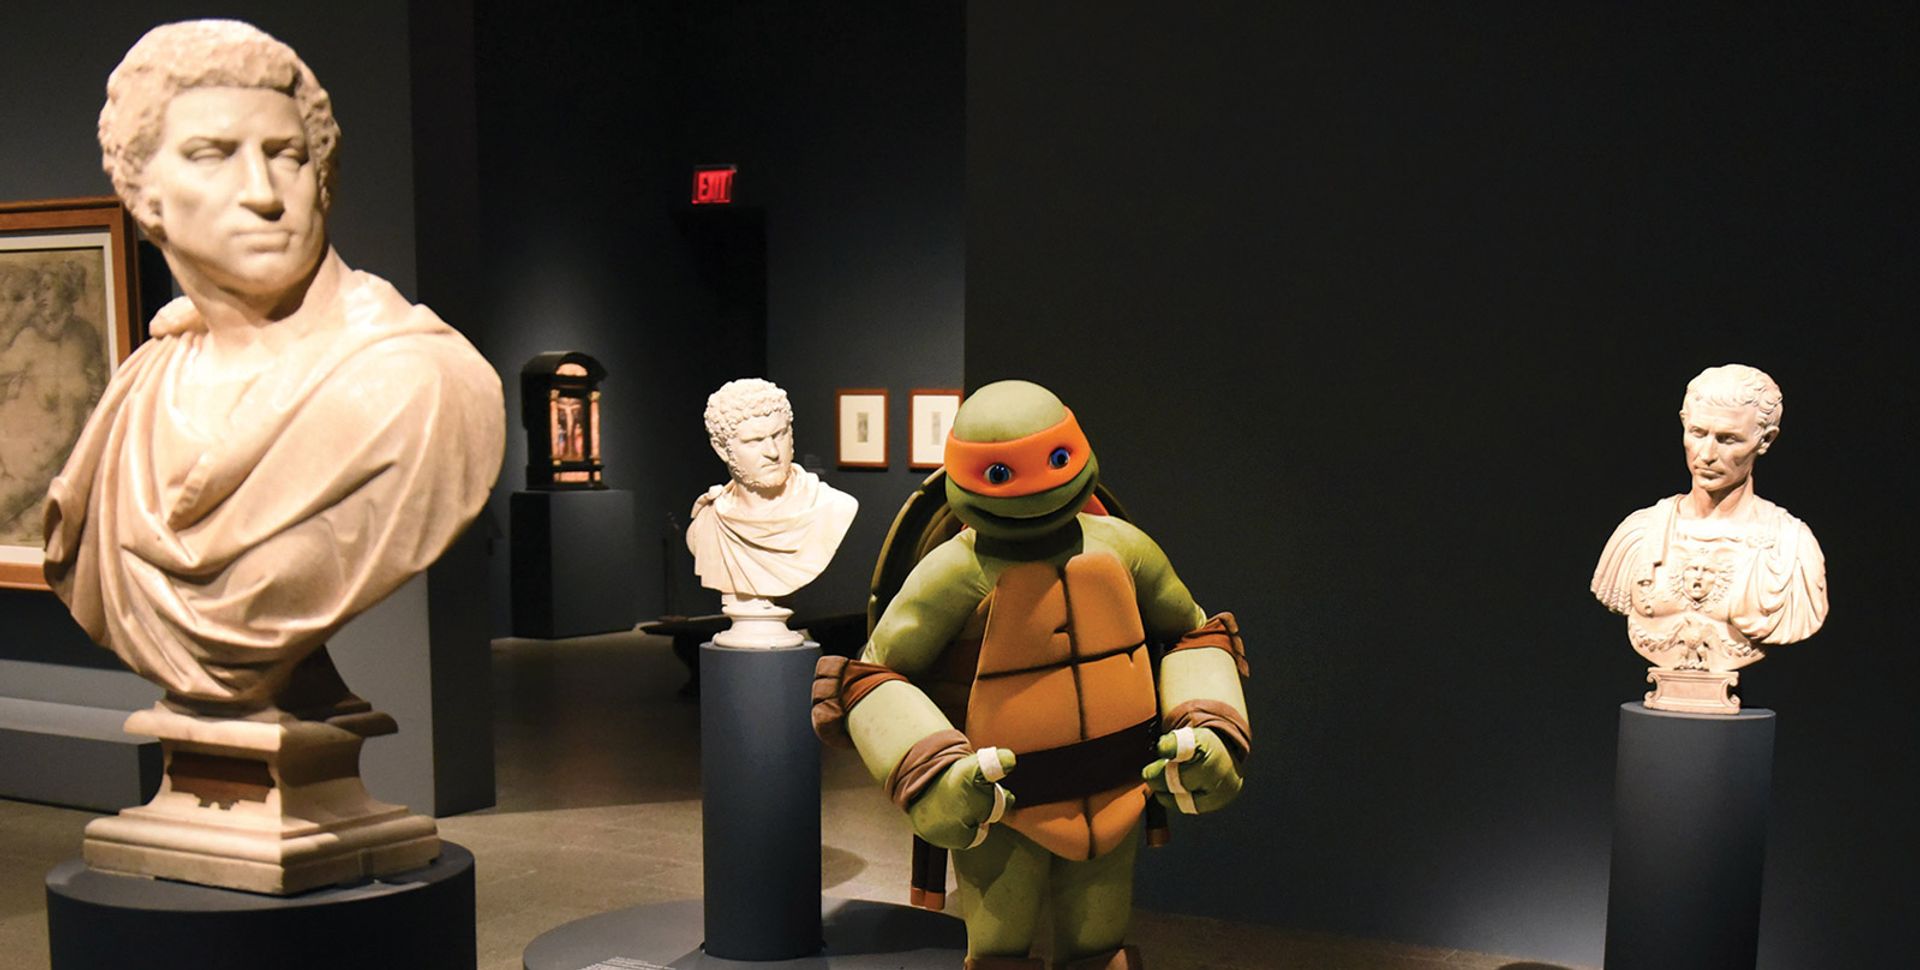 Michelangelo the Teenage Mutant Ninja Turtle in the Met’s Michelangelo show, which not only tops this category but is also runner-up in the overall exhibition rankings © TIMOTHY A. CLARY/AFP/Getty Images